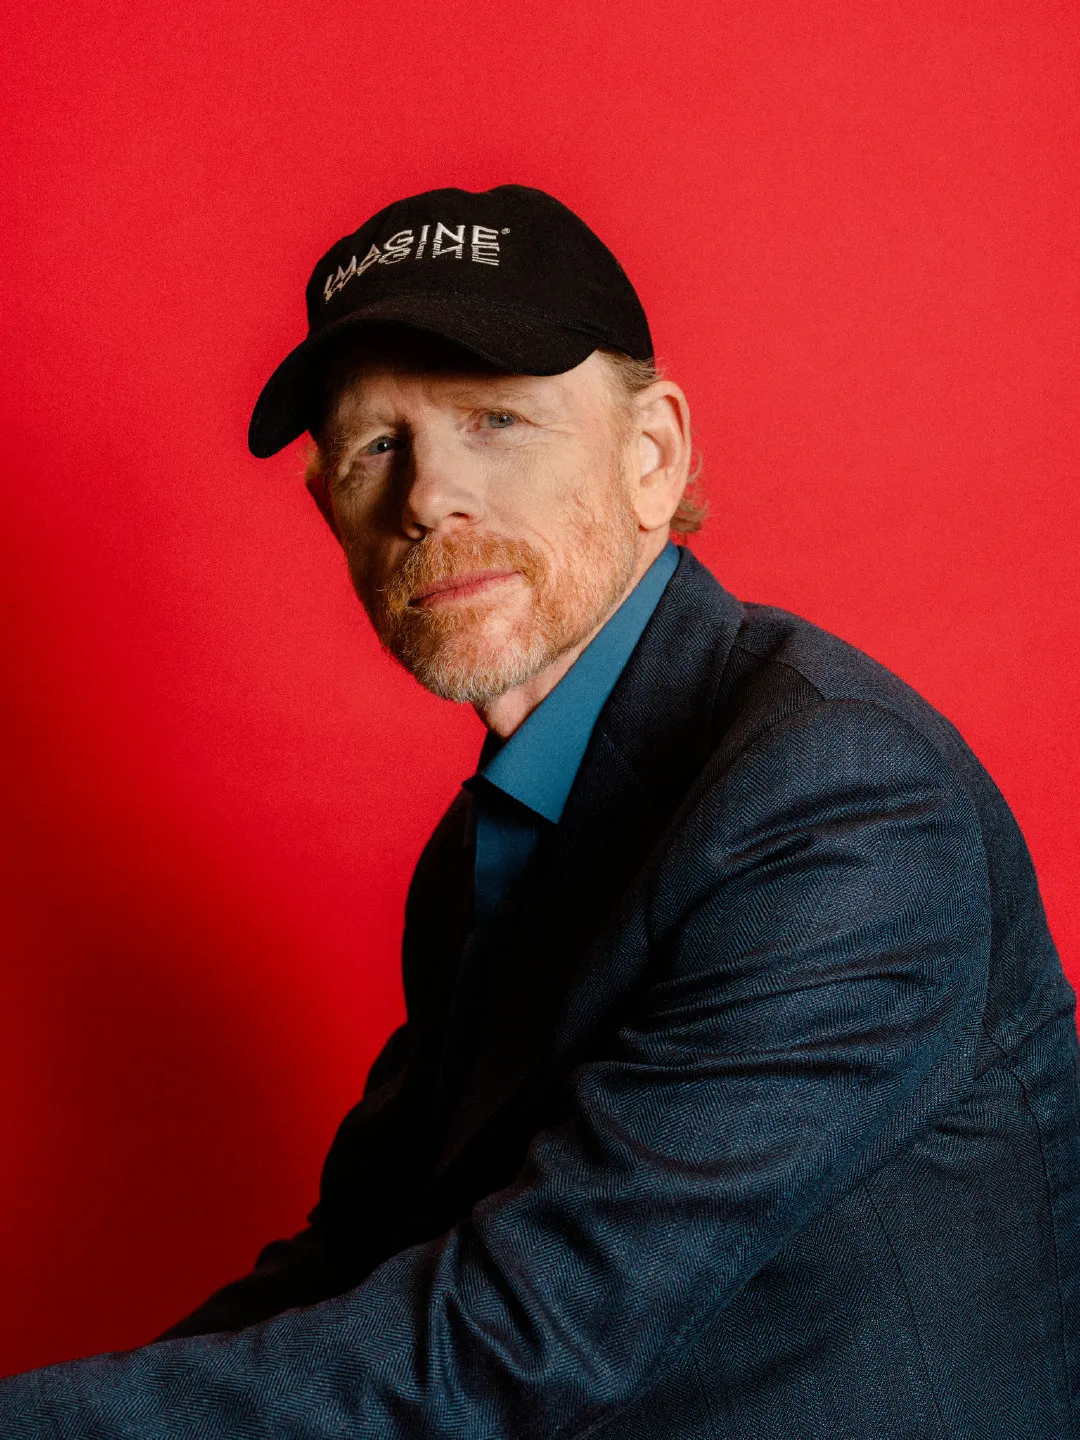 Ron Howard to direct crime thriller 'Origin Of Species' with screenplay by Noah Pink | FMV6